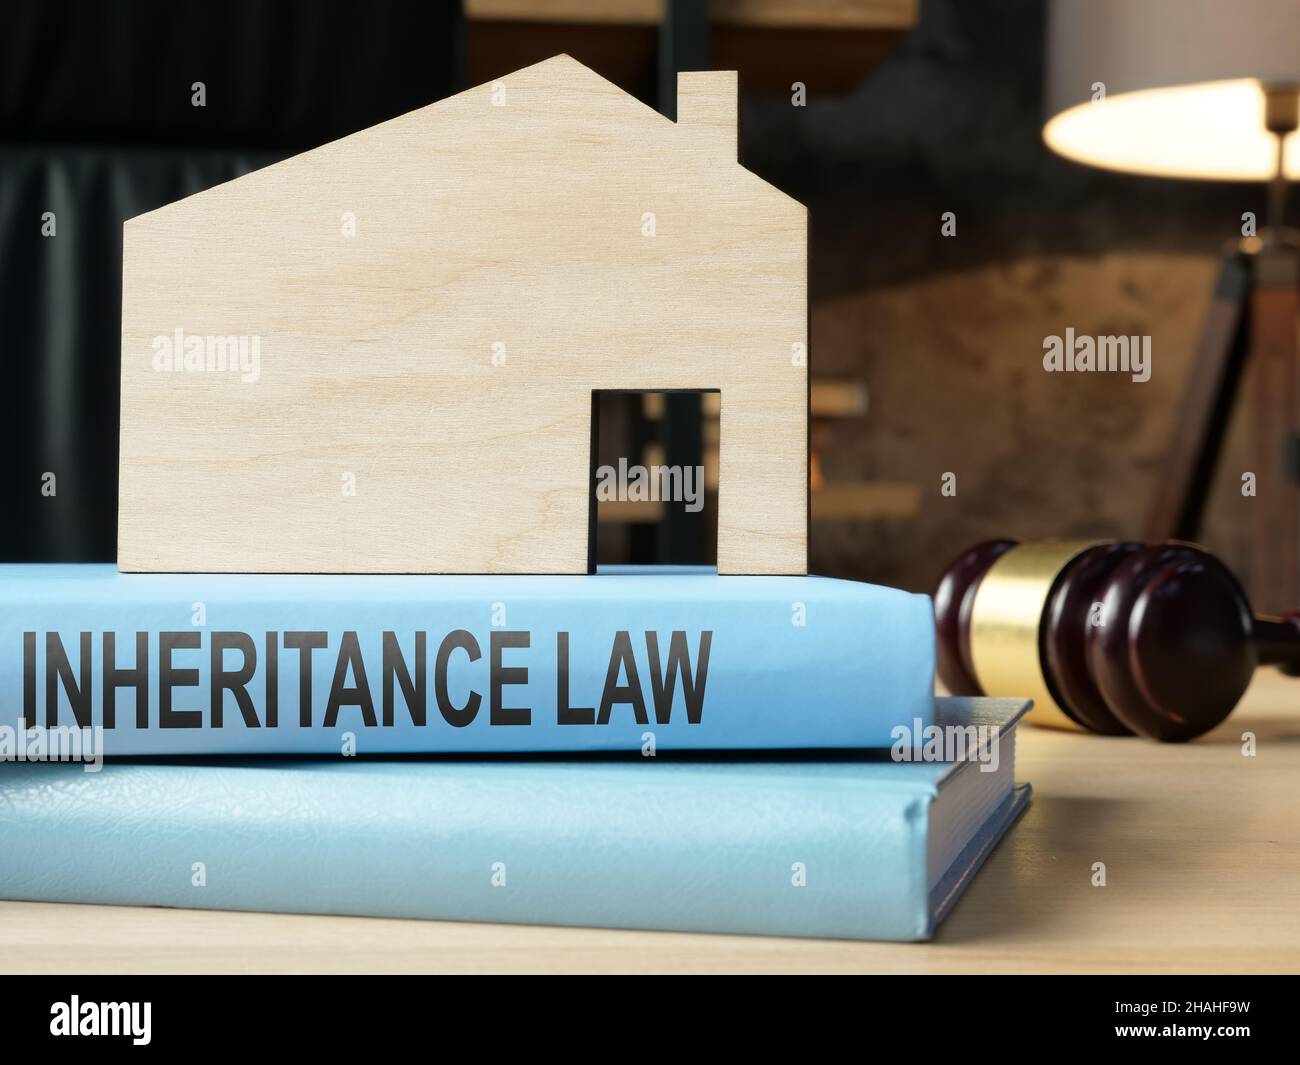 Inheritance law book and model of house. Stock Photo